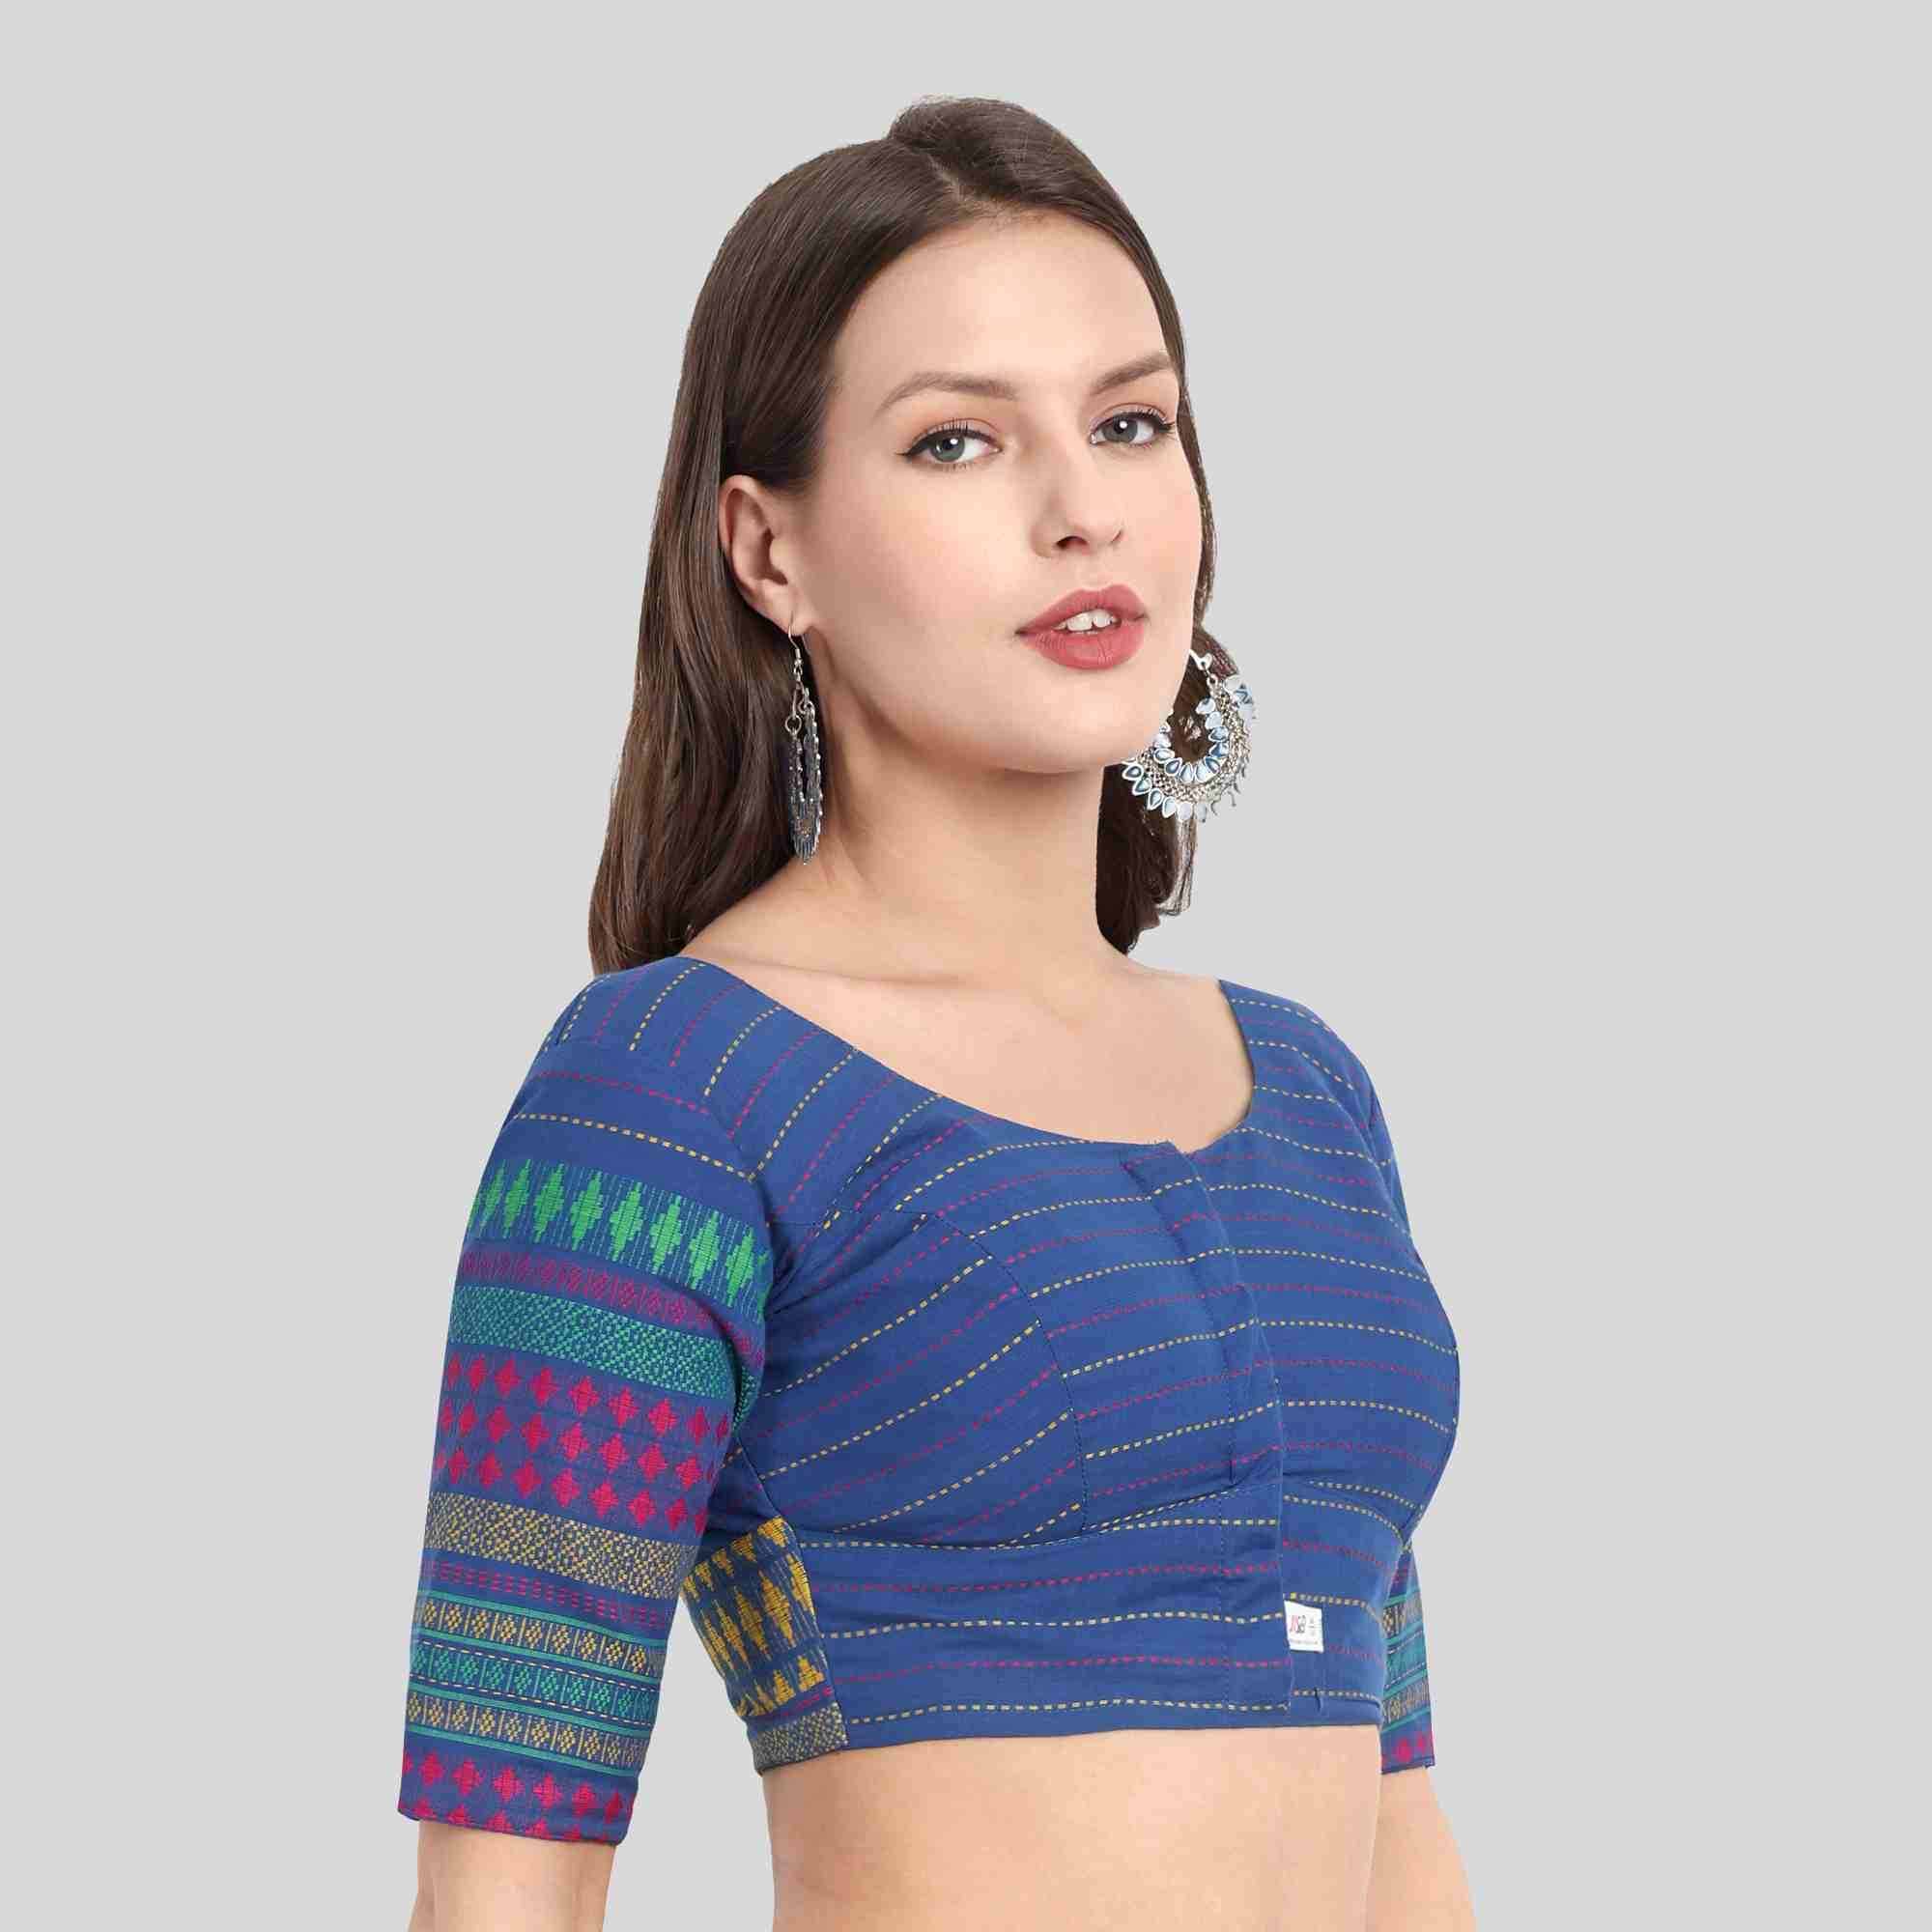 Readymade blouse with Border design in ink blue color